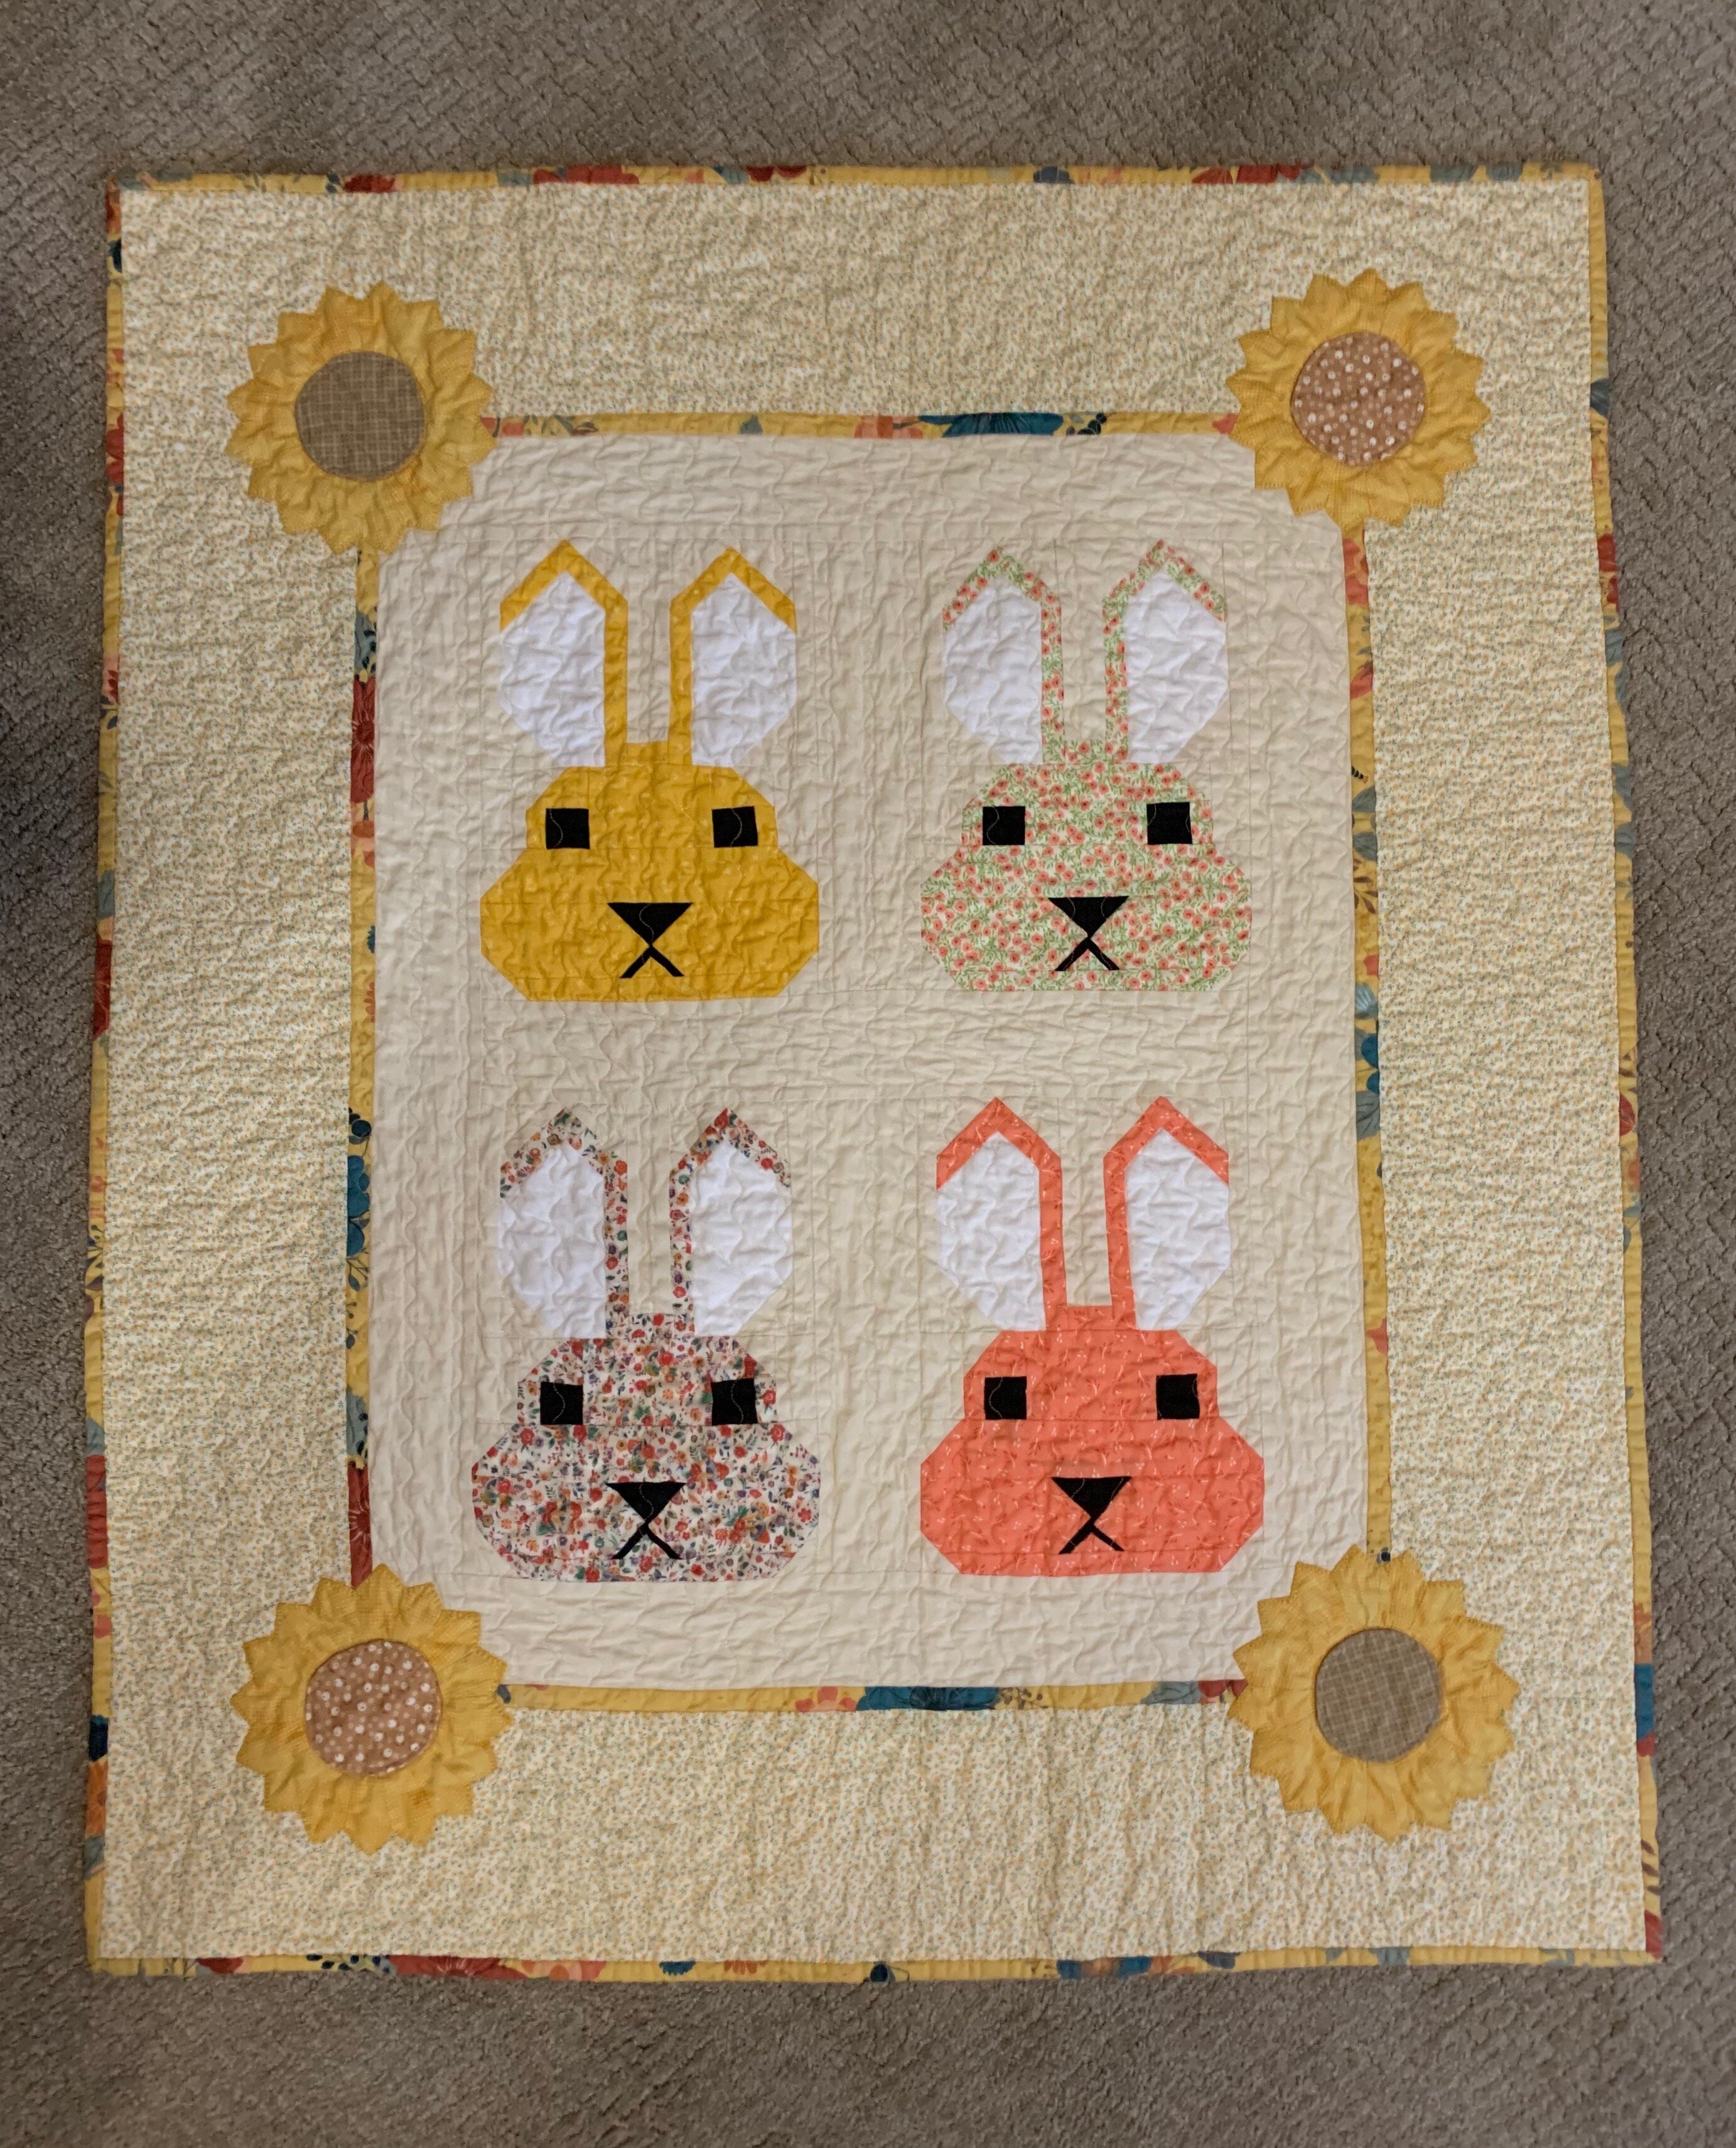 A baby quilt made by Christine Paul.